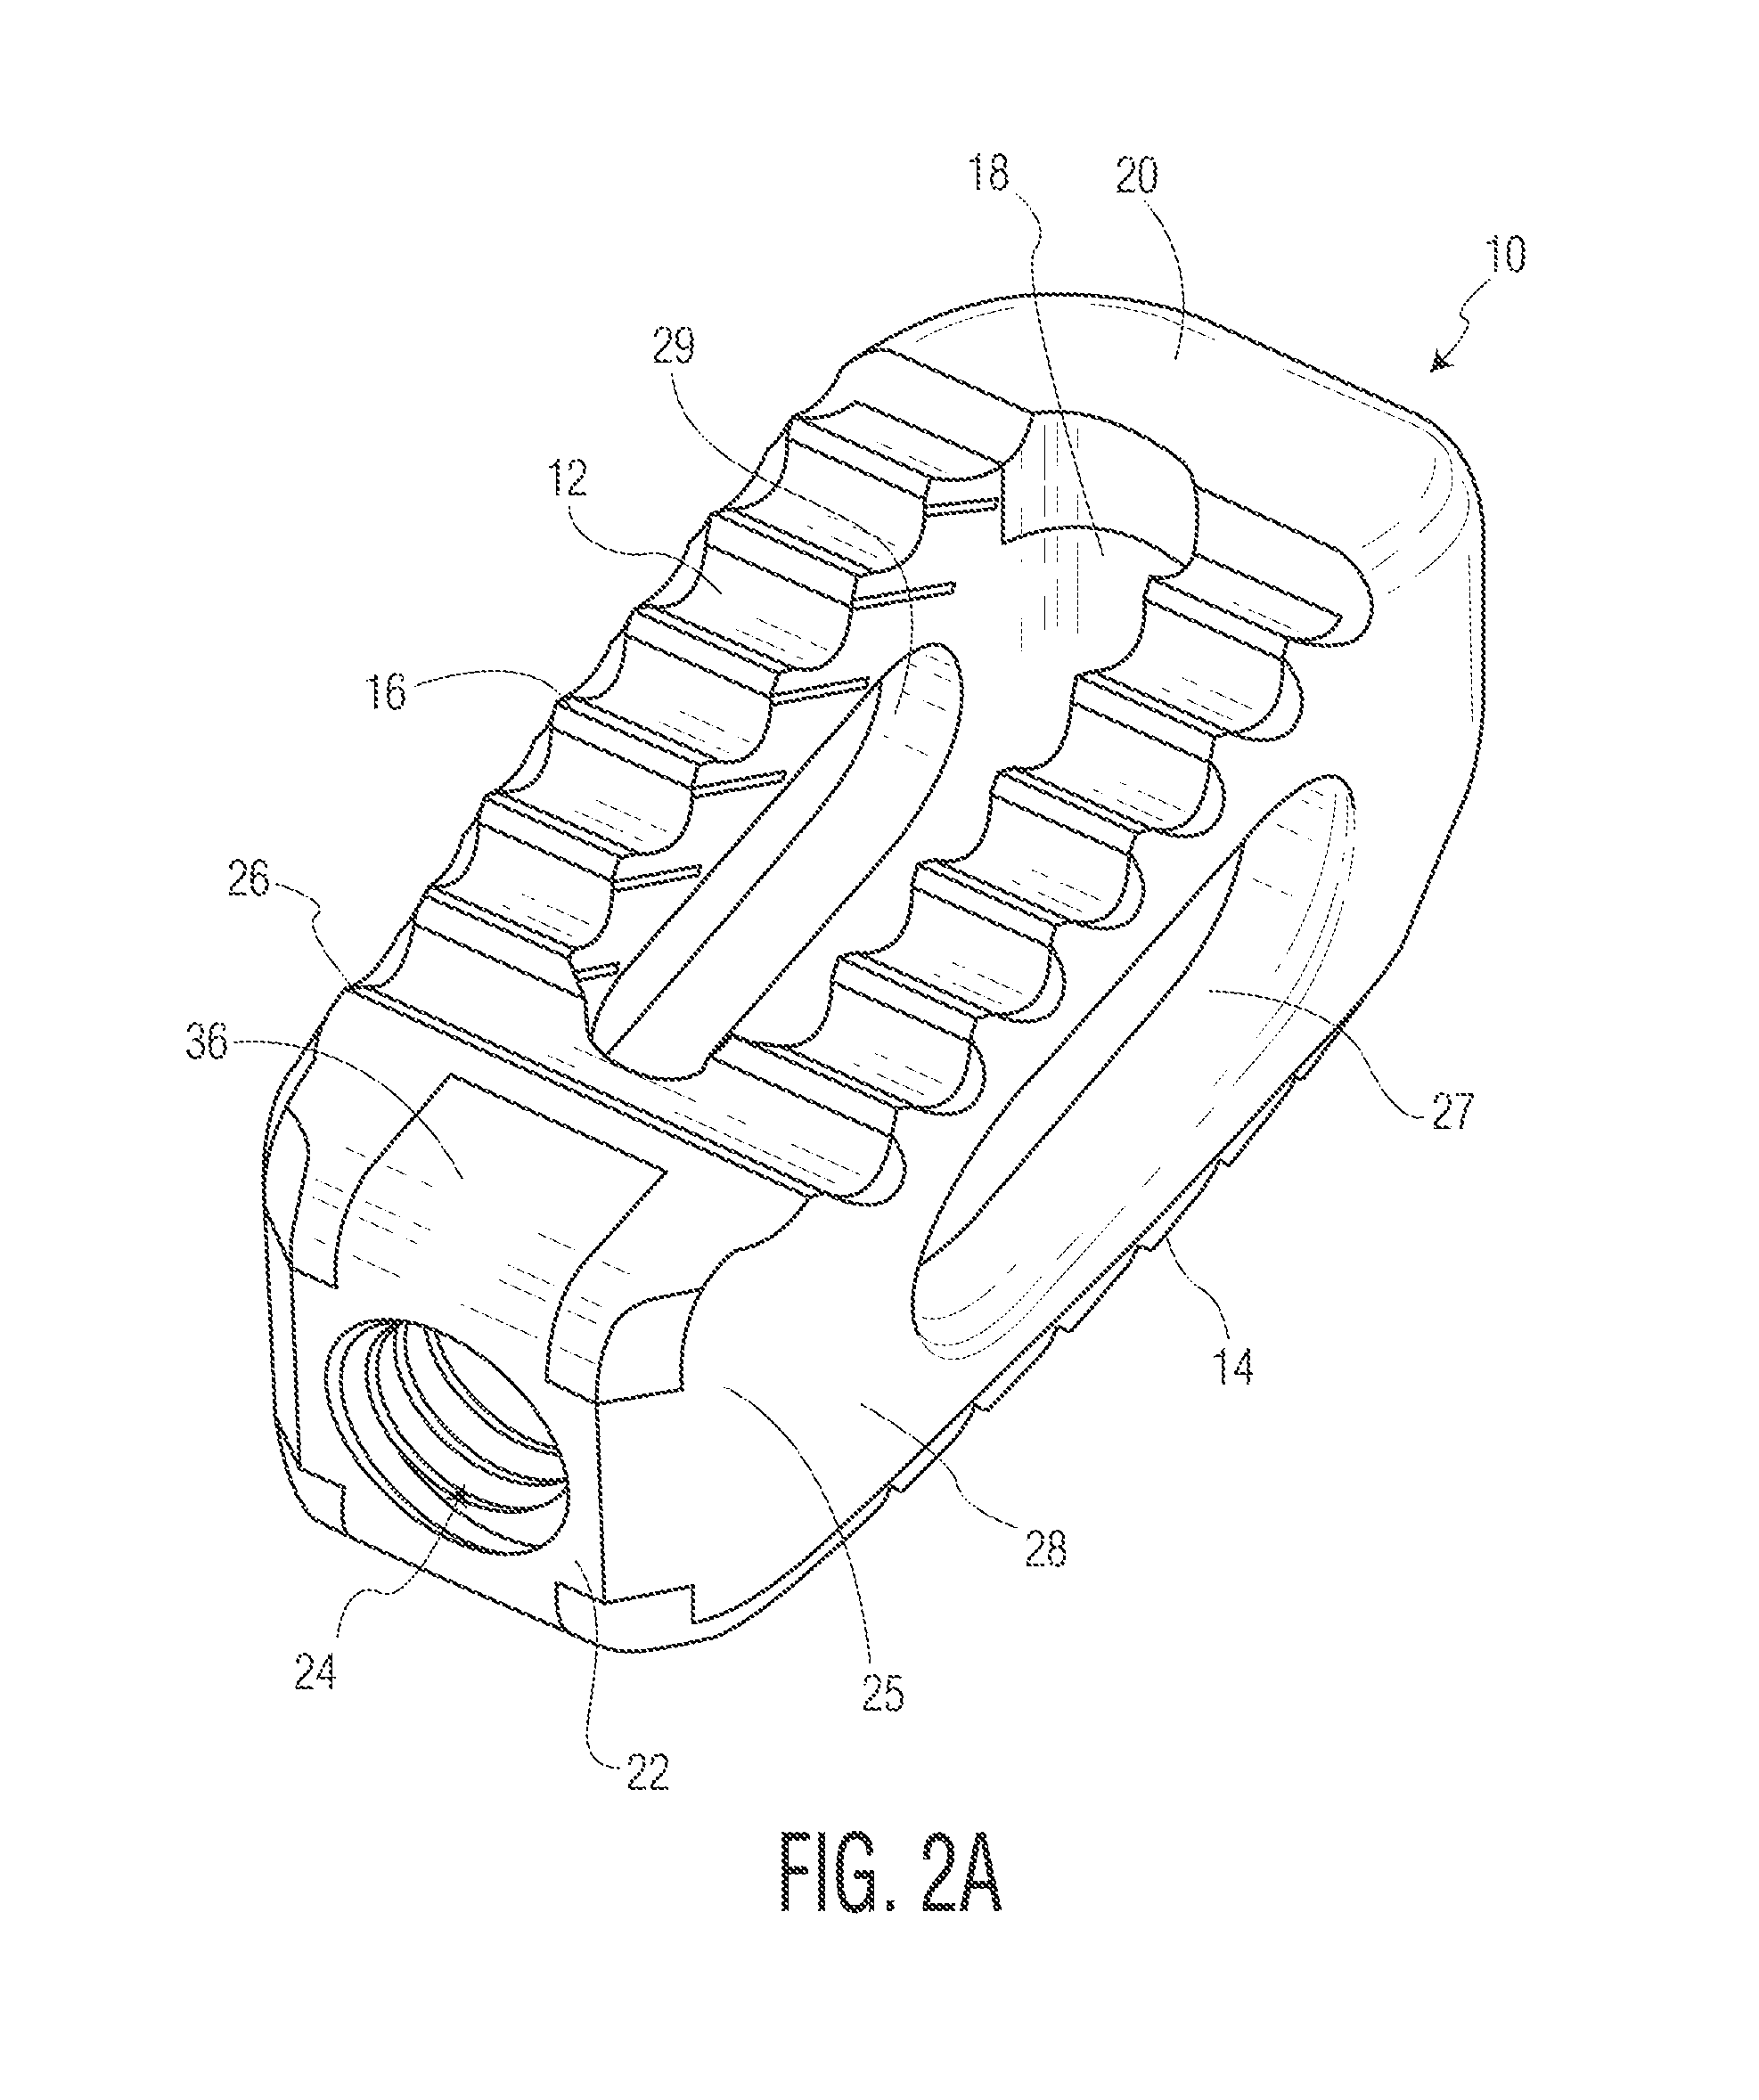 Spinal implant with porous and solid surfaces